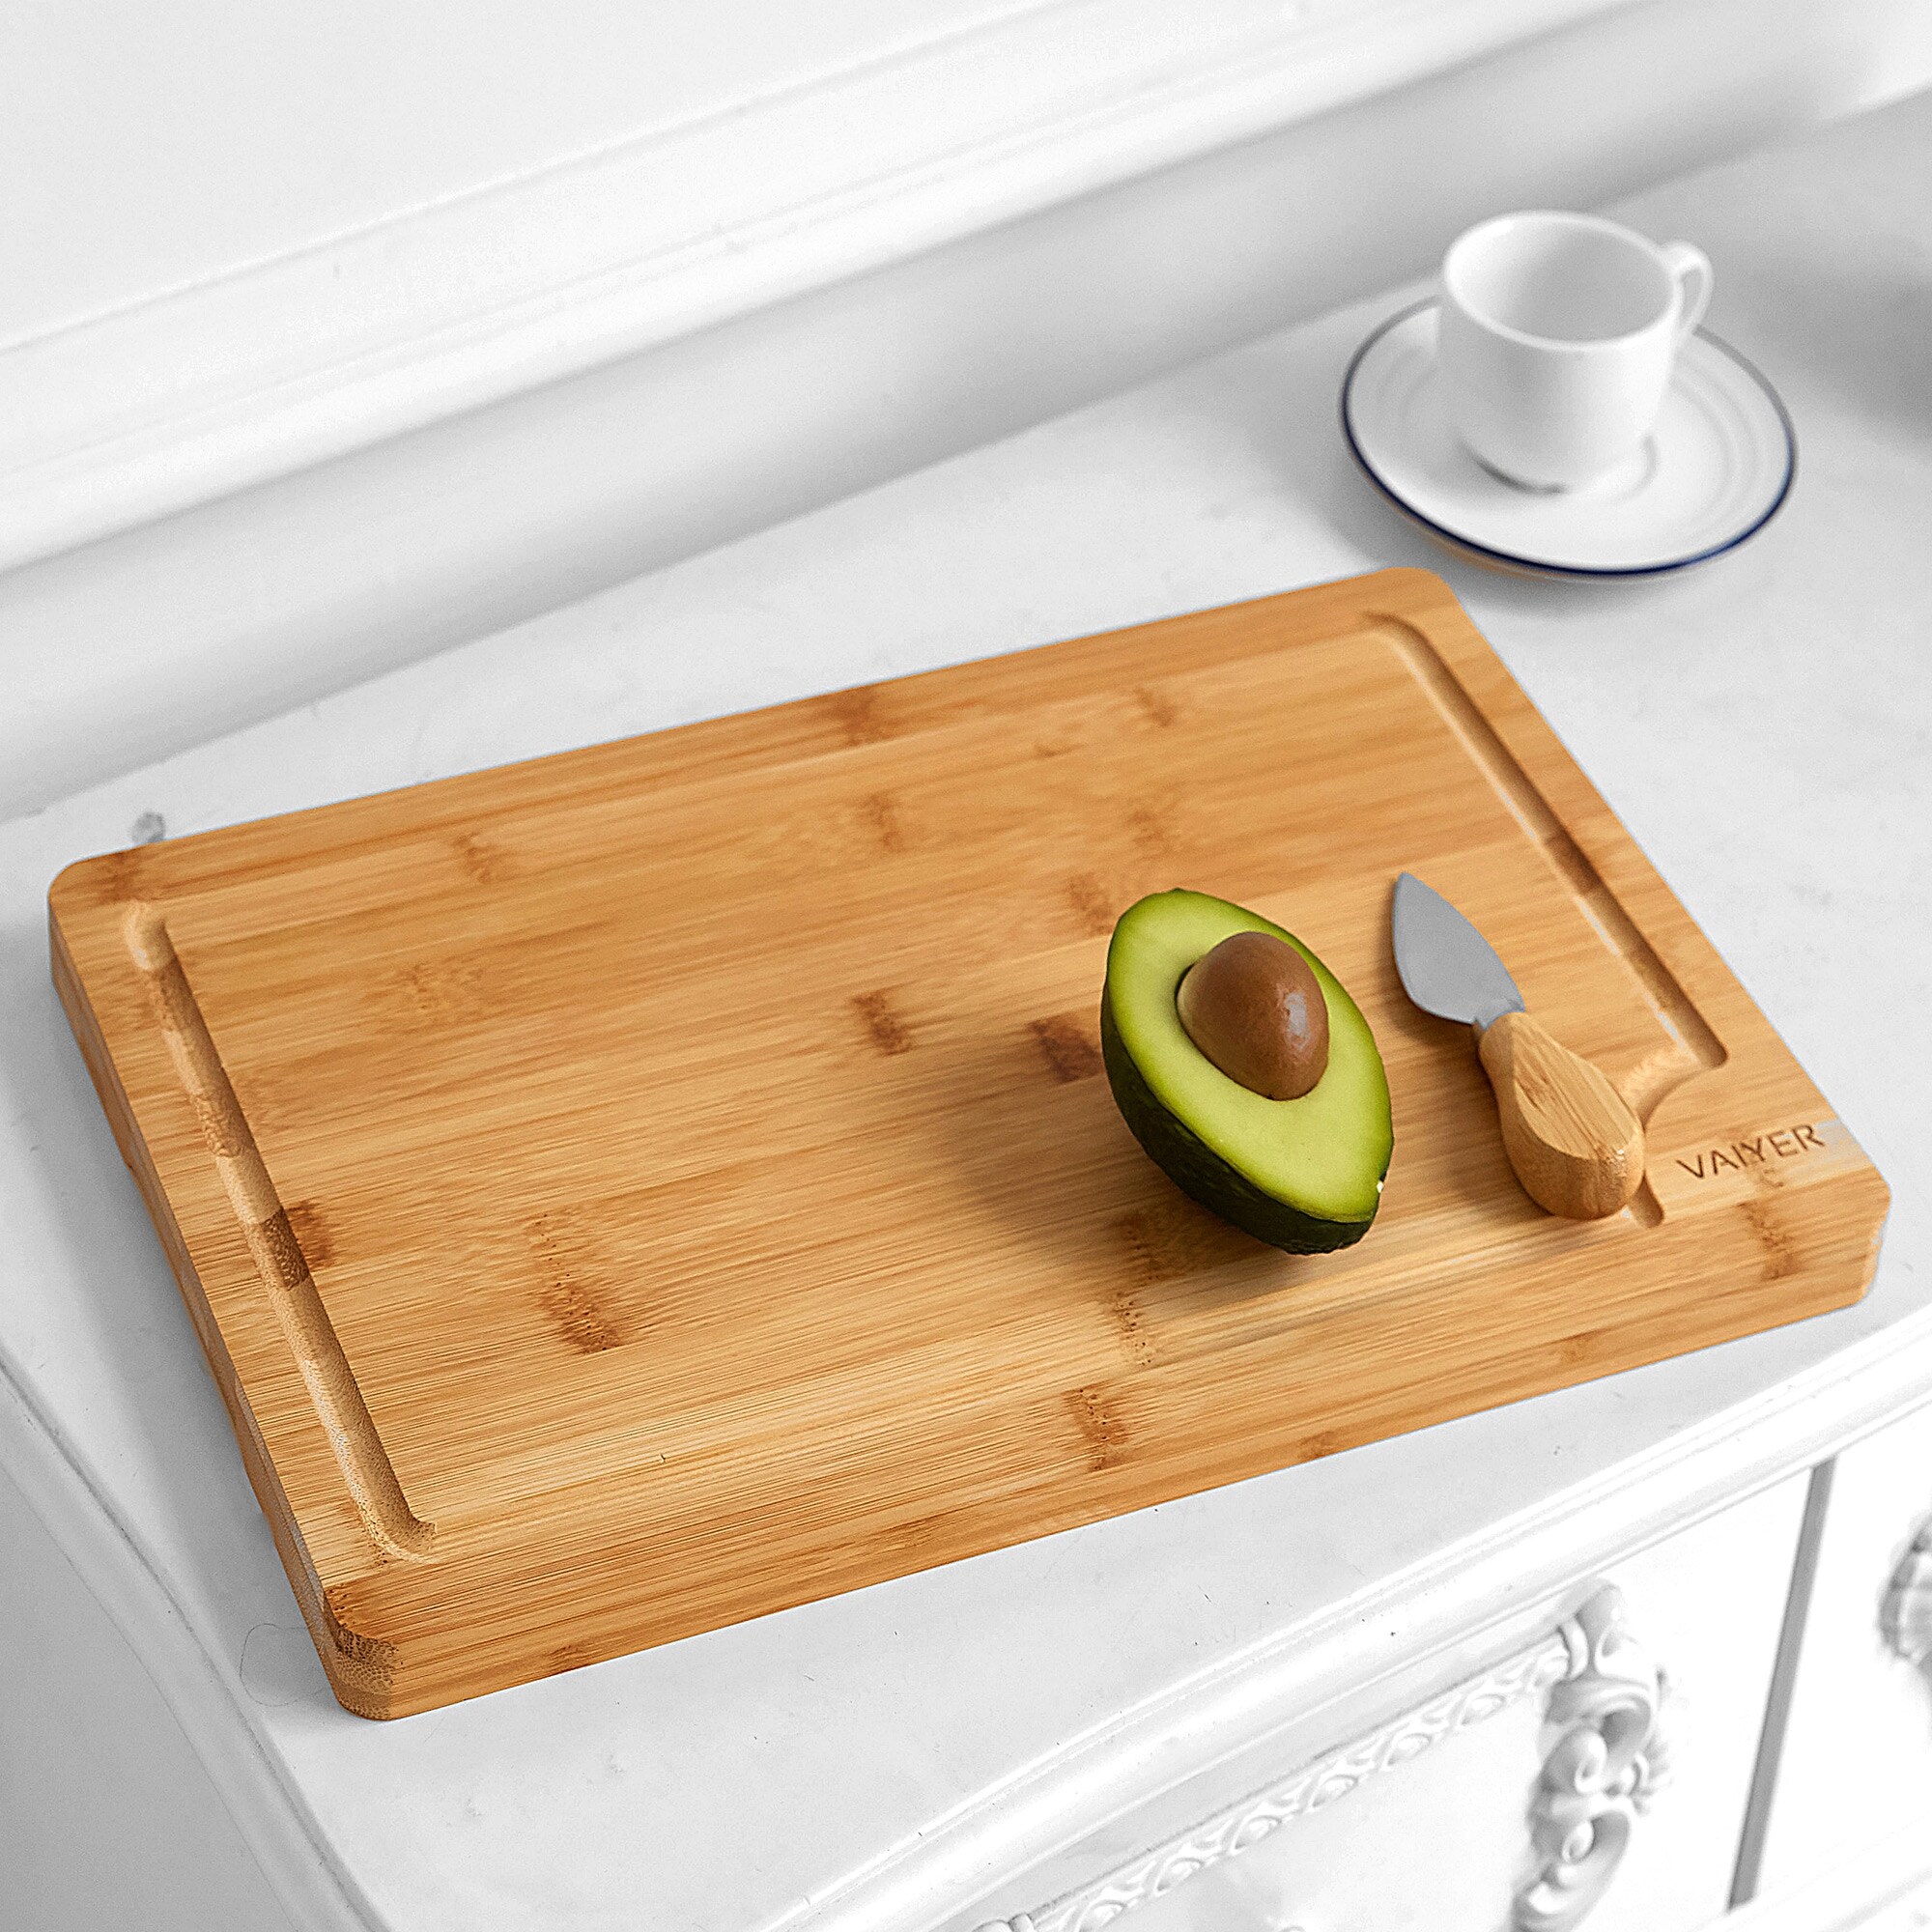 https://ak1.ostkcdn.com/images/products/is/images/direct/871205a1ede0a9b512bed61354cac59bd02c9312/Vaiyer-Organic-Bamboo-Cutting-Board-w--Juice-Groove%2C-Heavy-Duty-Kitchen-Chopping-Board-for-Meat%2C-Chicken%2C-Cheese-and-Vegetables.jpg